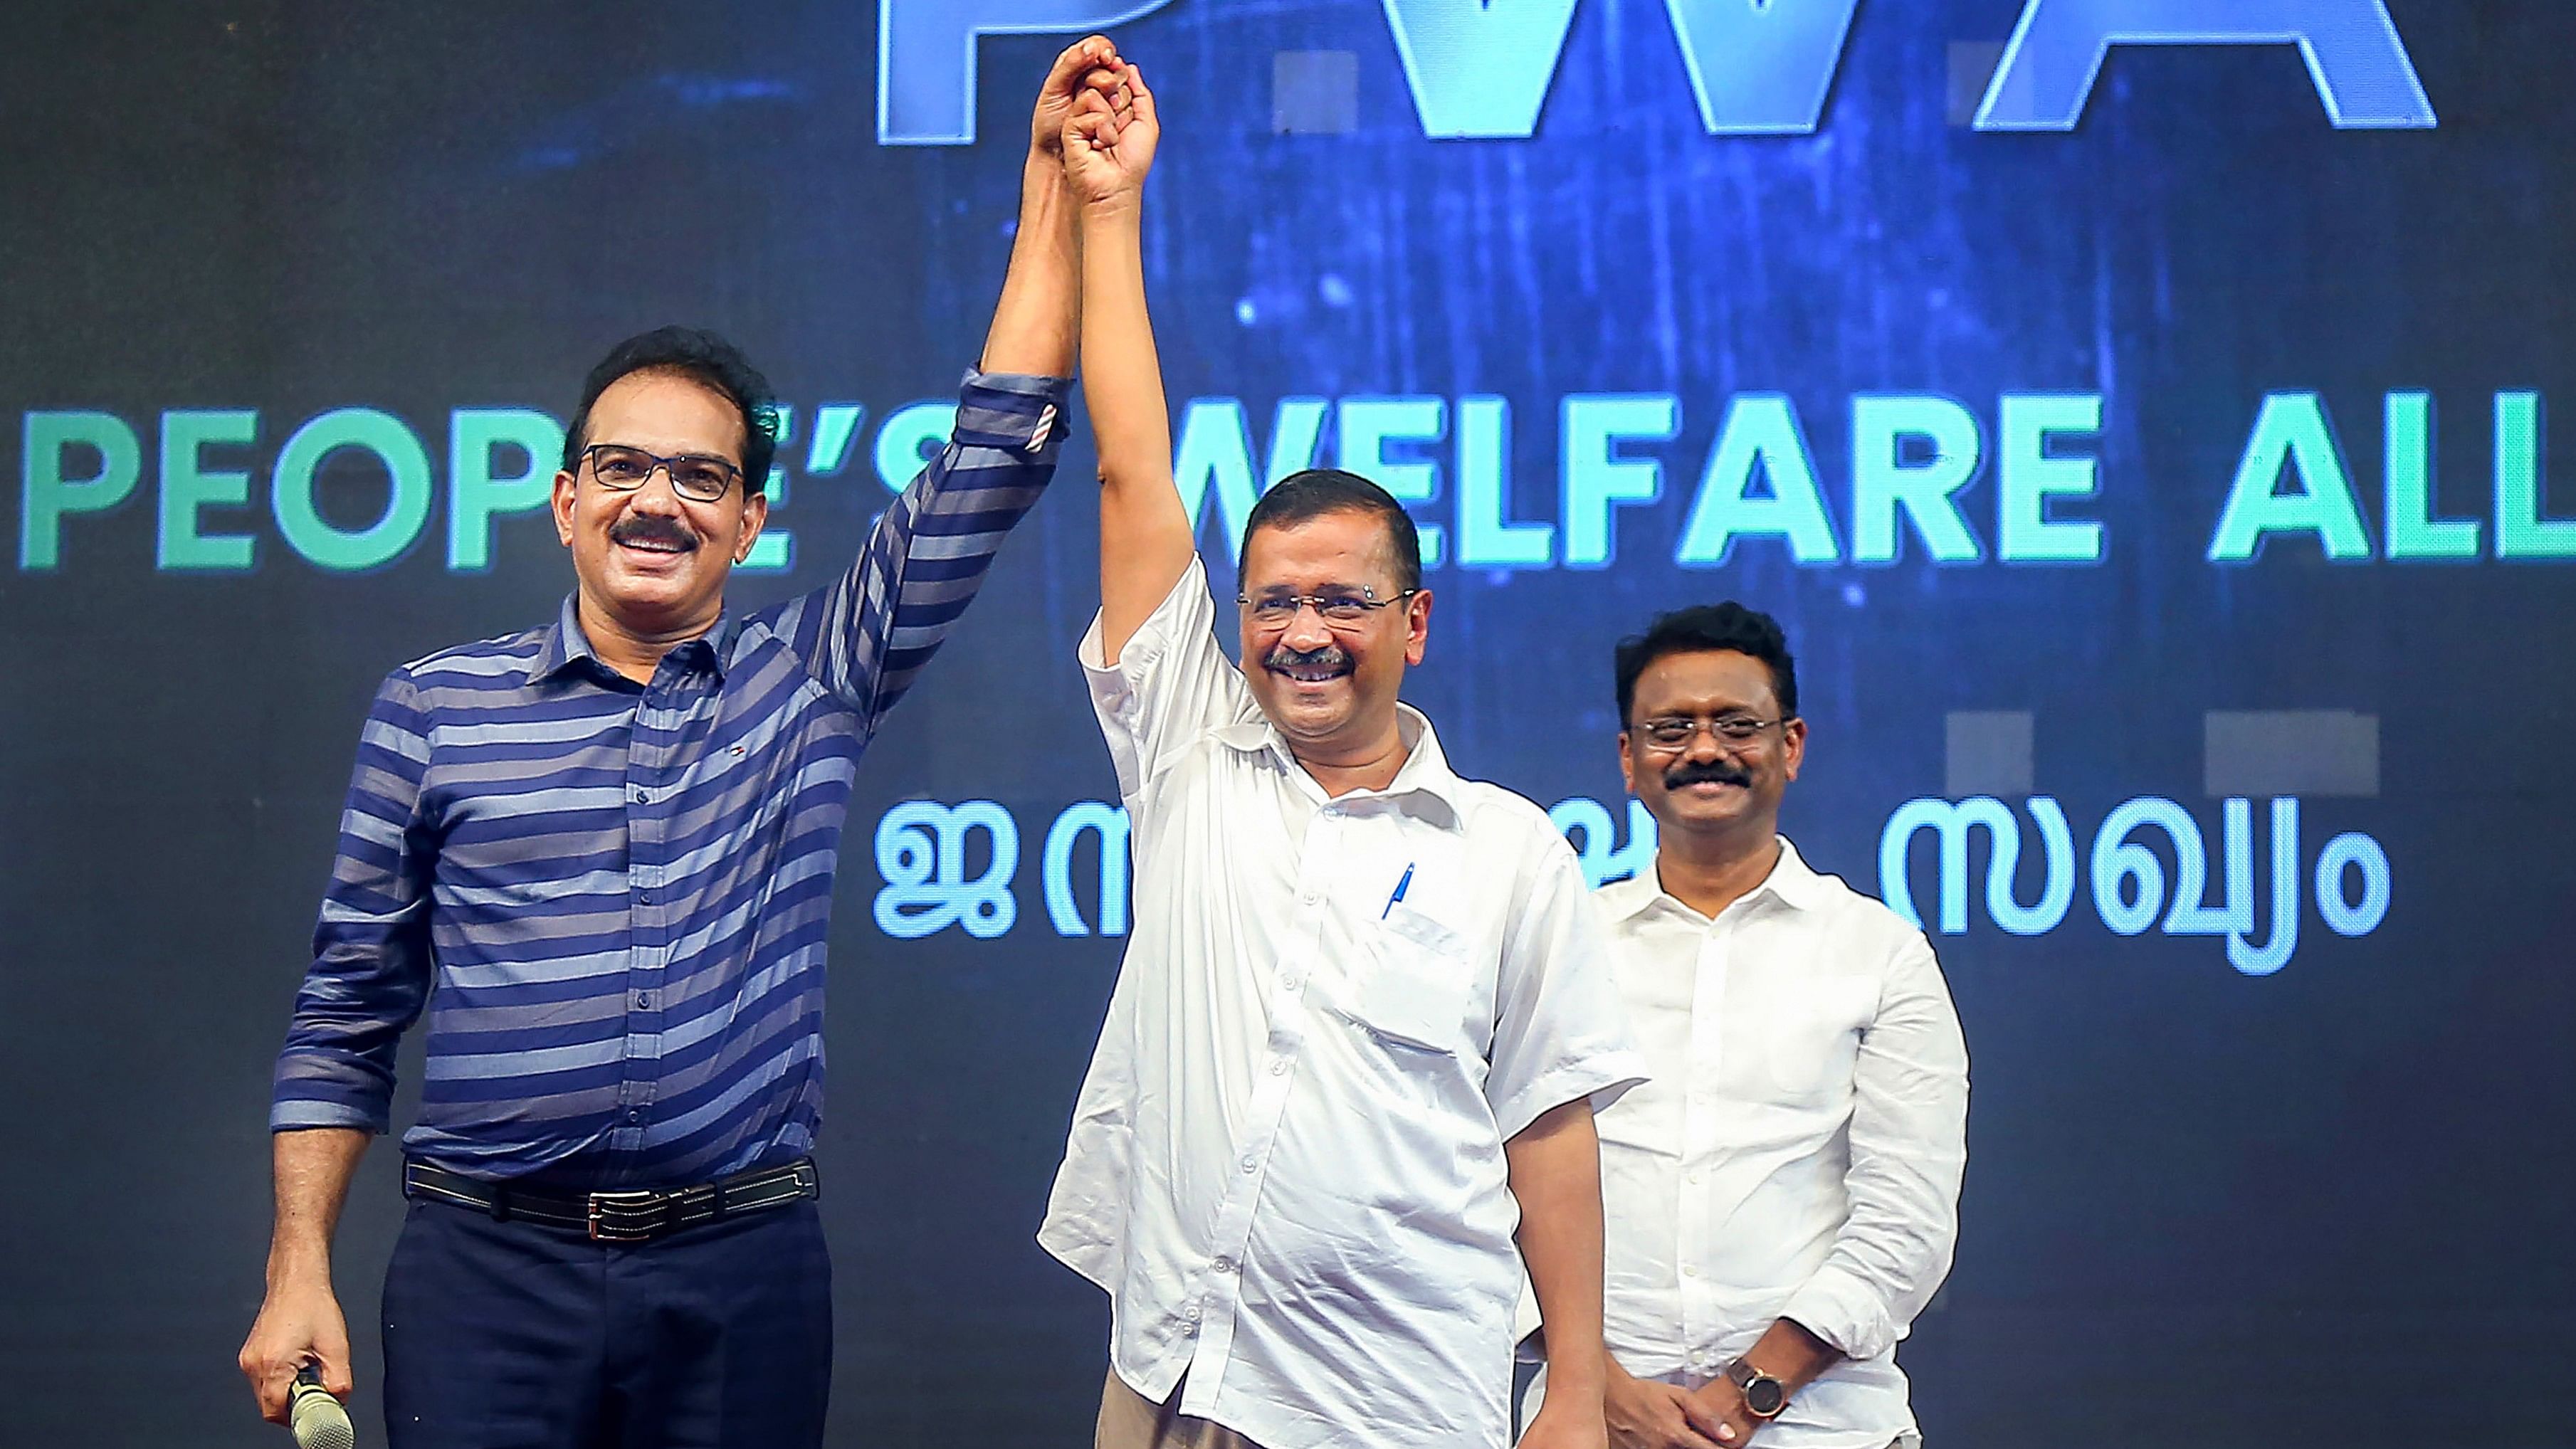 <div class="paragraphs"><p>In 2022, Twenty20 had tied up with Arvind Kejriwal-led Aam Aadmi Party (AAP)&nbsp;to form People's Welfare Alliance. However, it recently decided to end the alliance.</p></div>